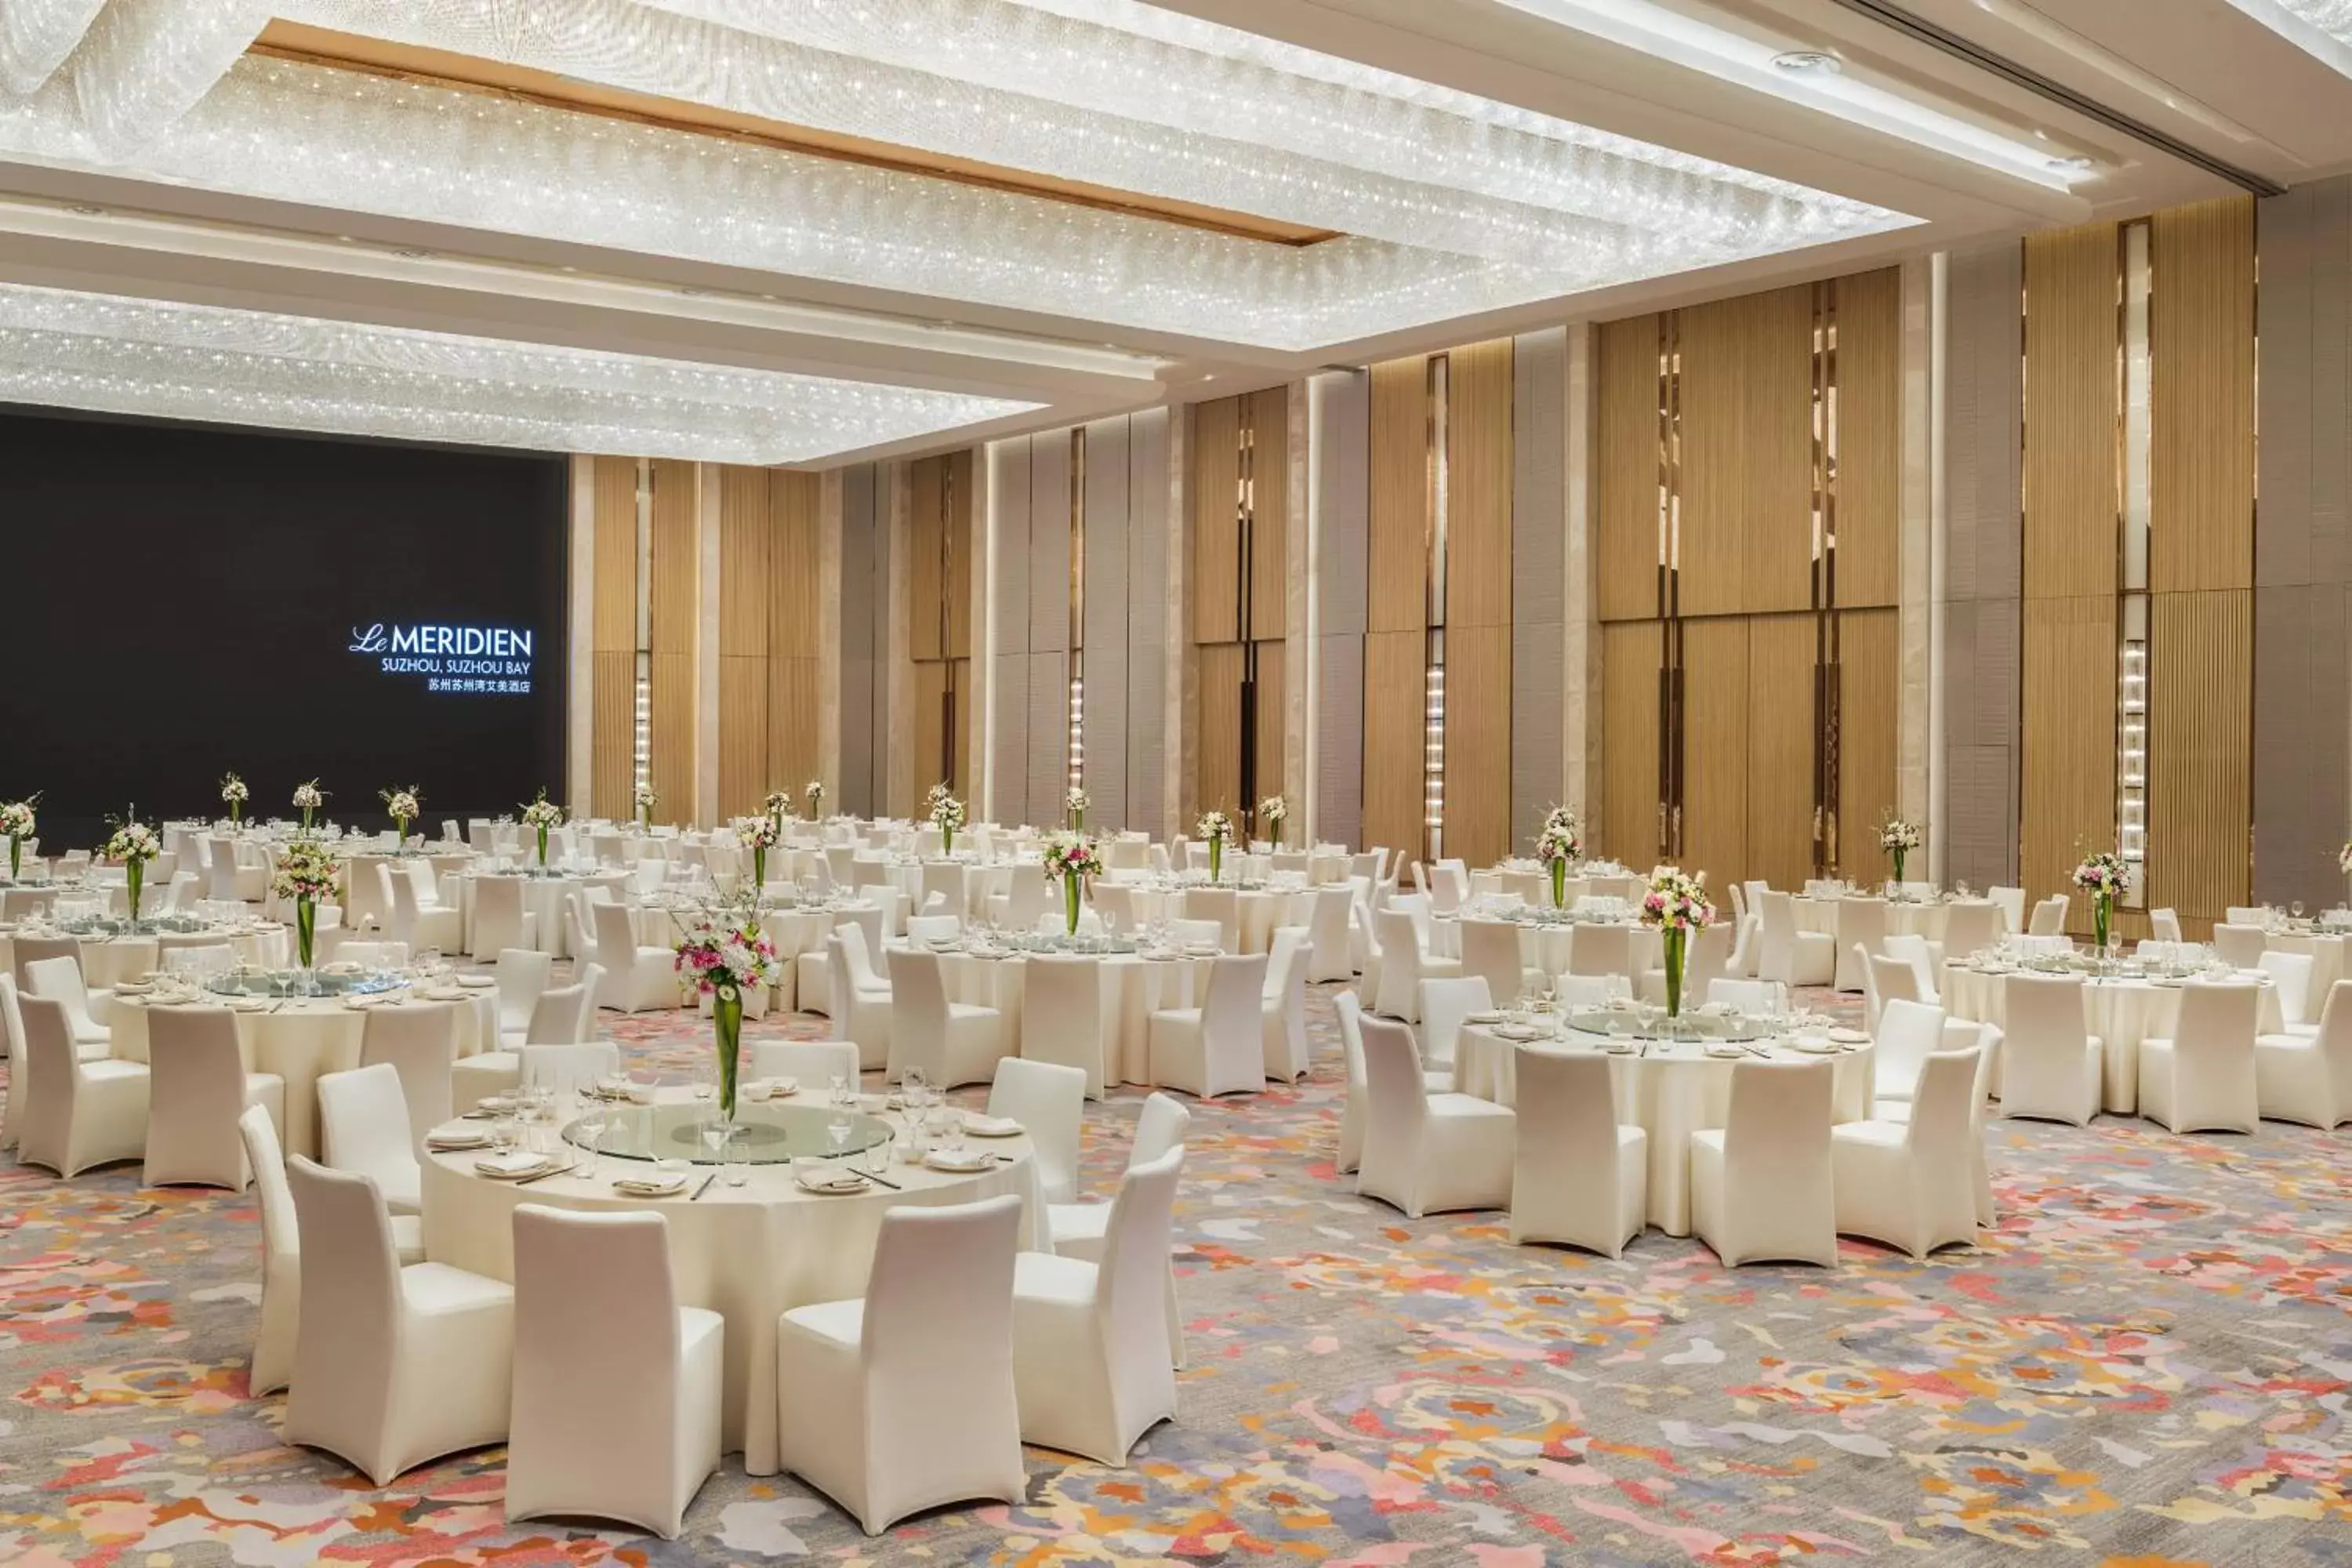 Meeting/conference room, Banquet Facilities in Le Méridien Suzhou, Suzhou Bay